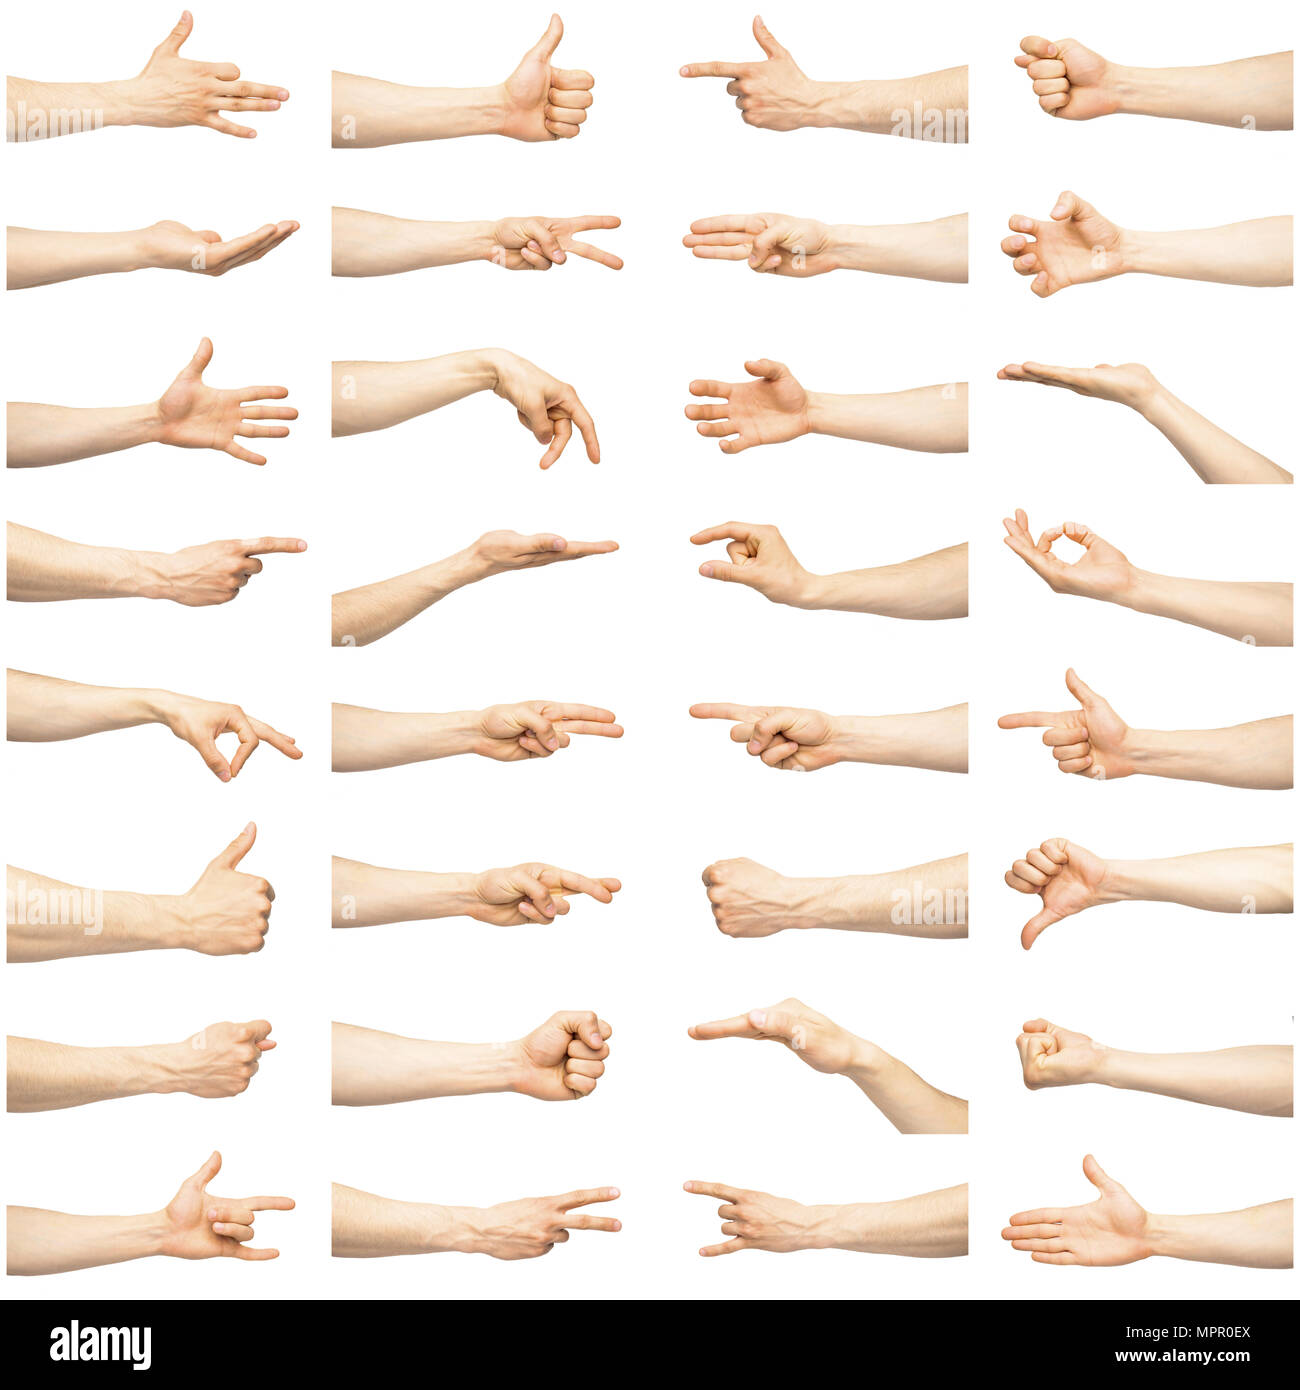 Multiple male hand gestures Stock Photo